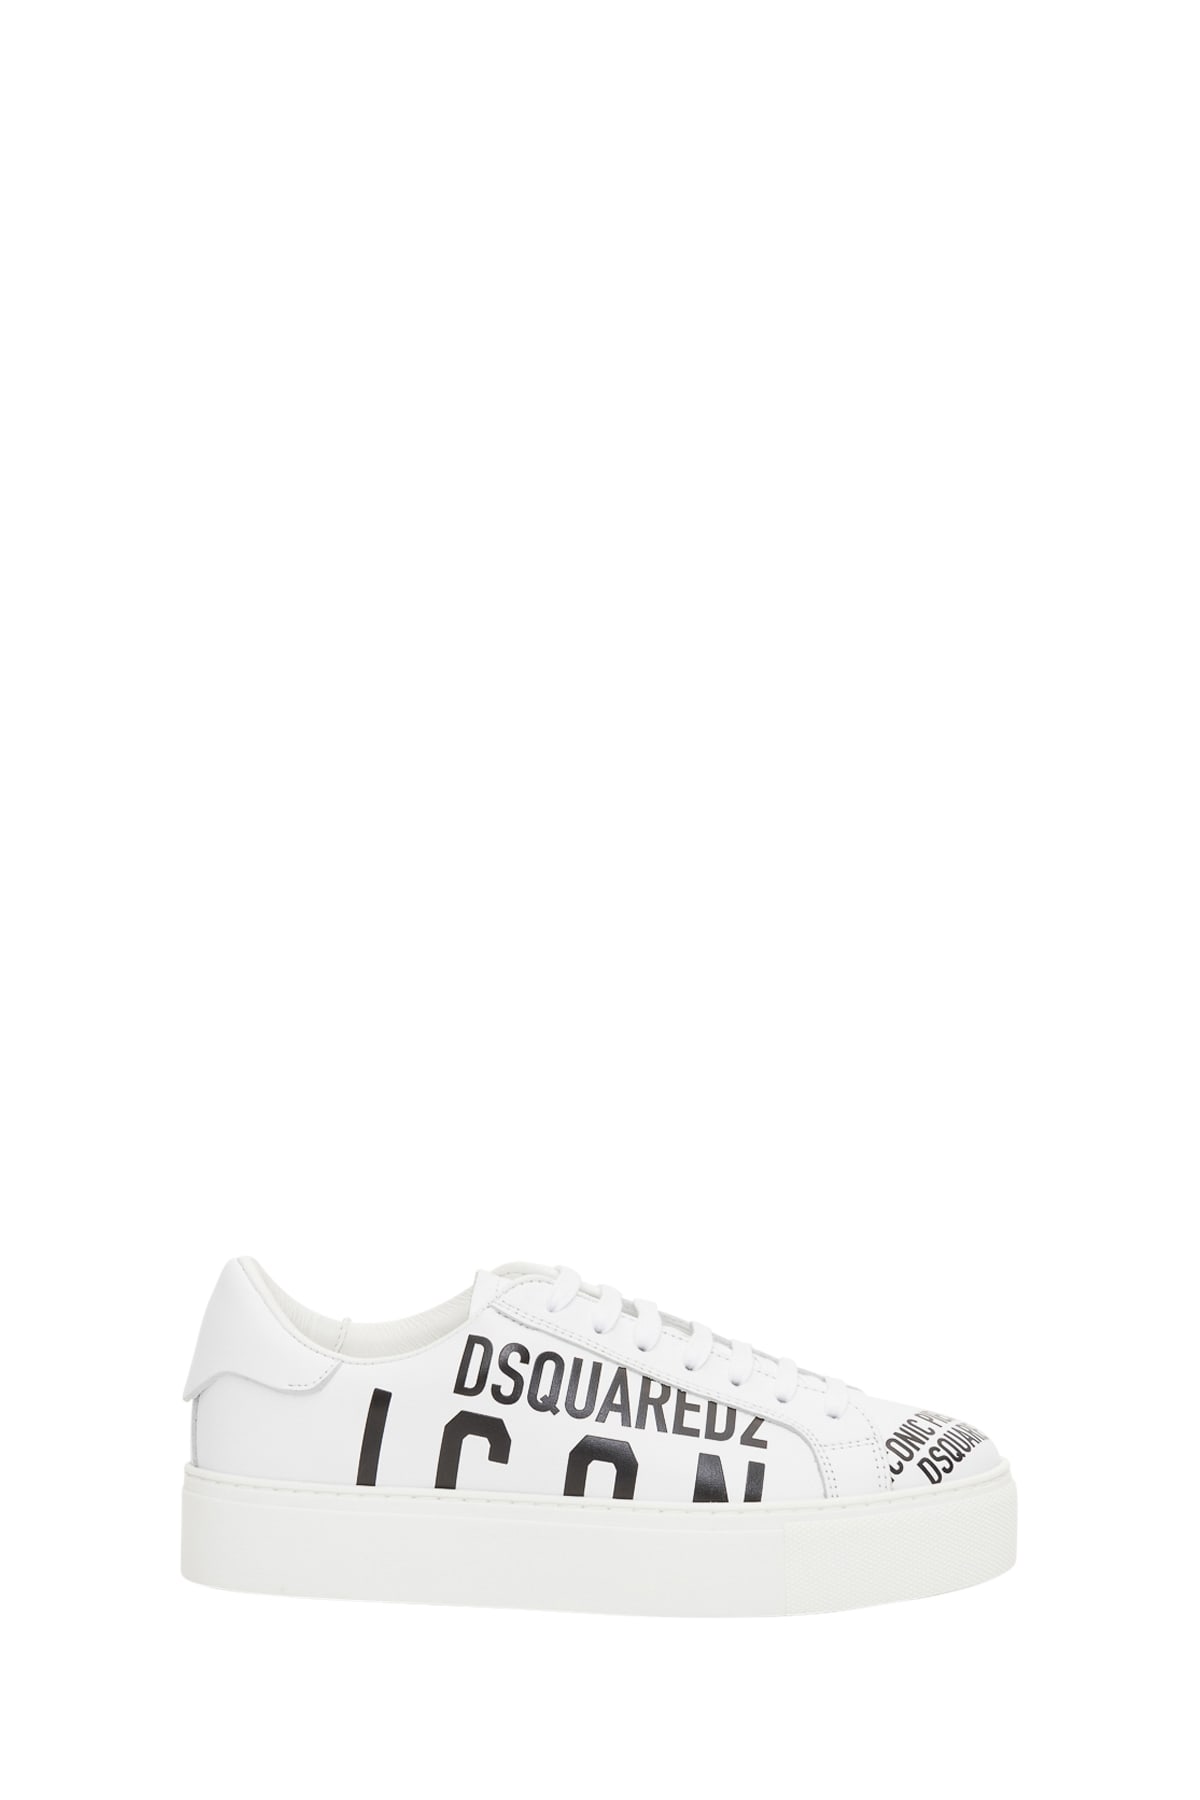 DSQUARED2 ICON SNEAKERS,11244373